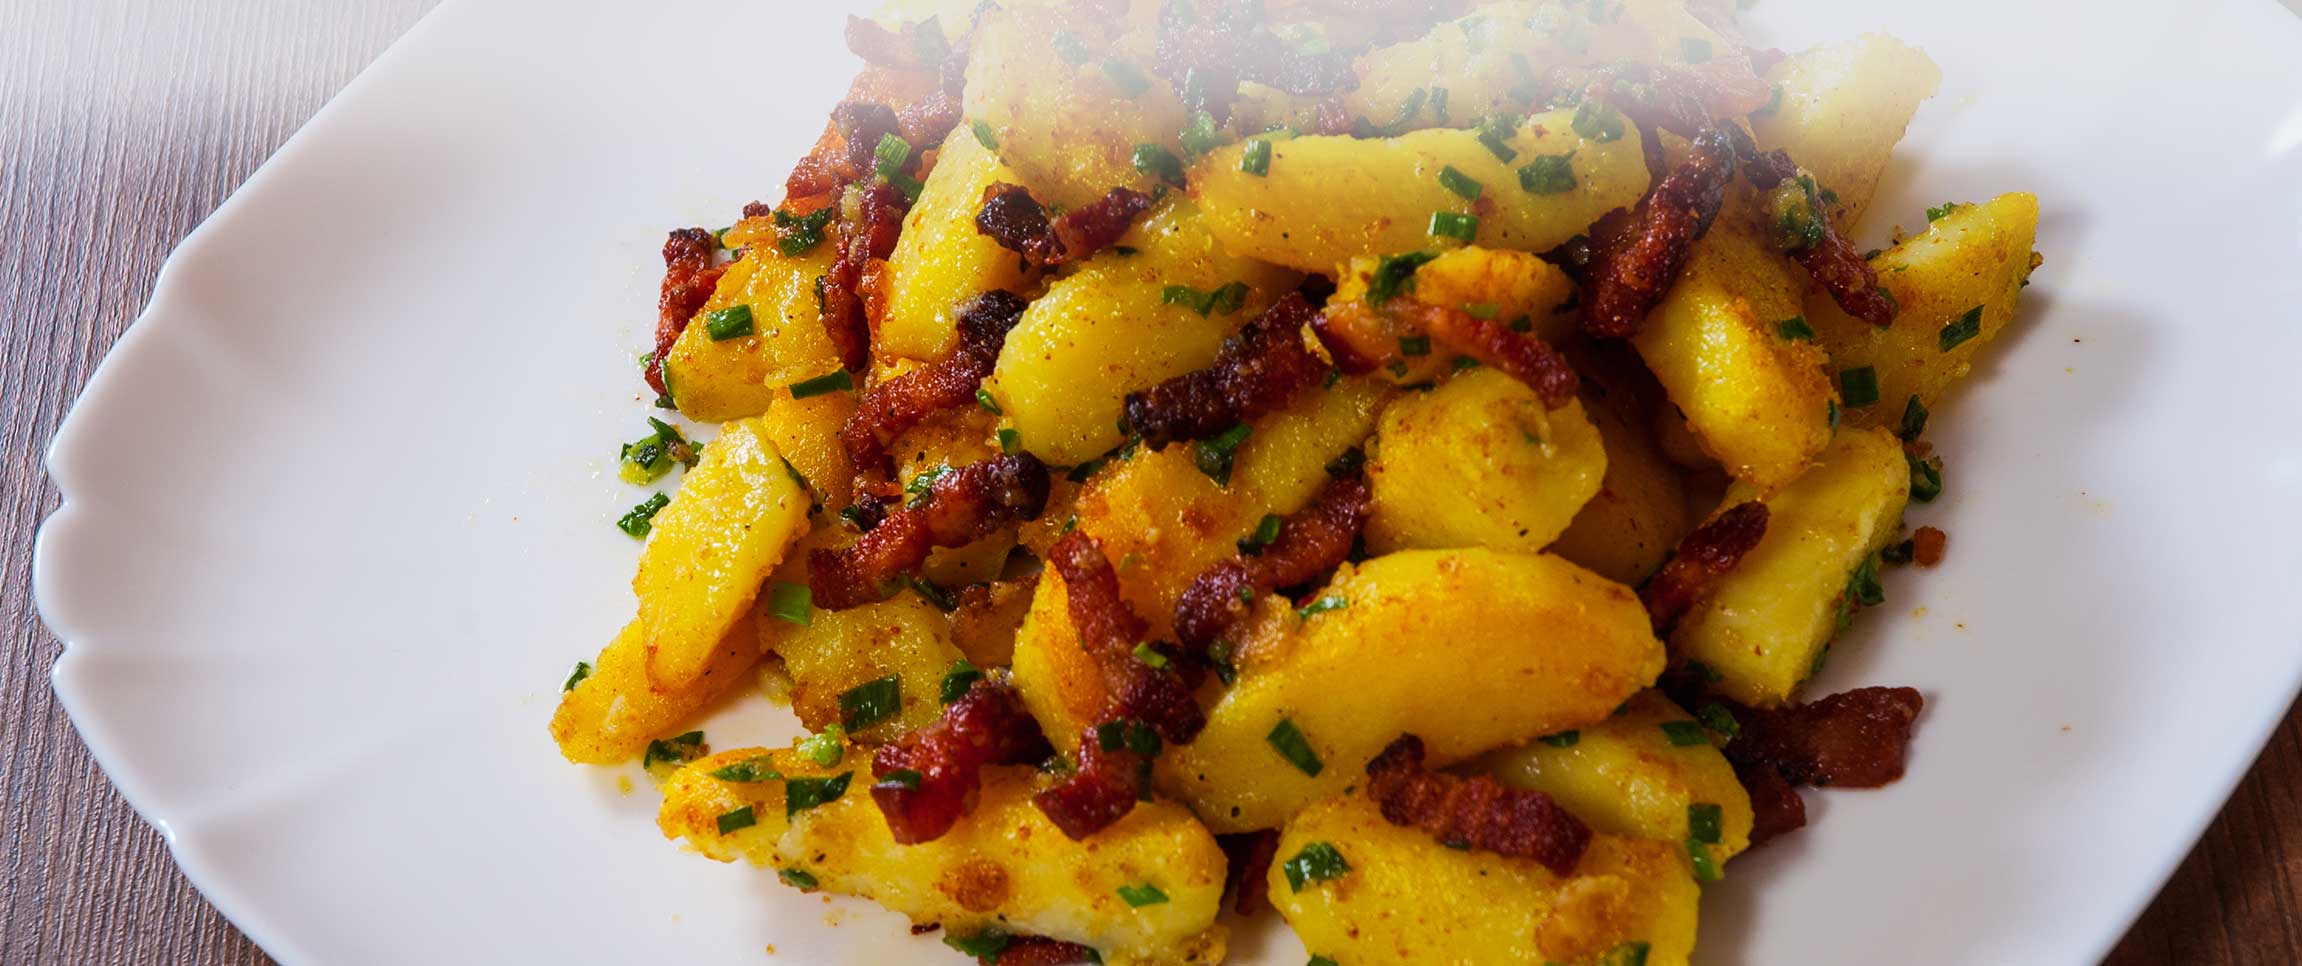 Oven Roasted Sweet Potatoes with Bacon